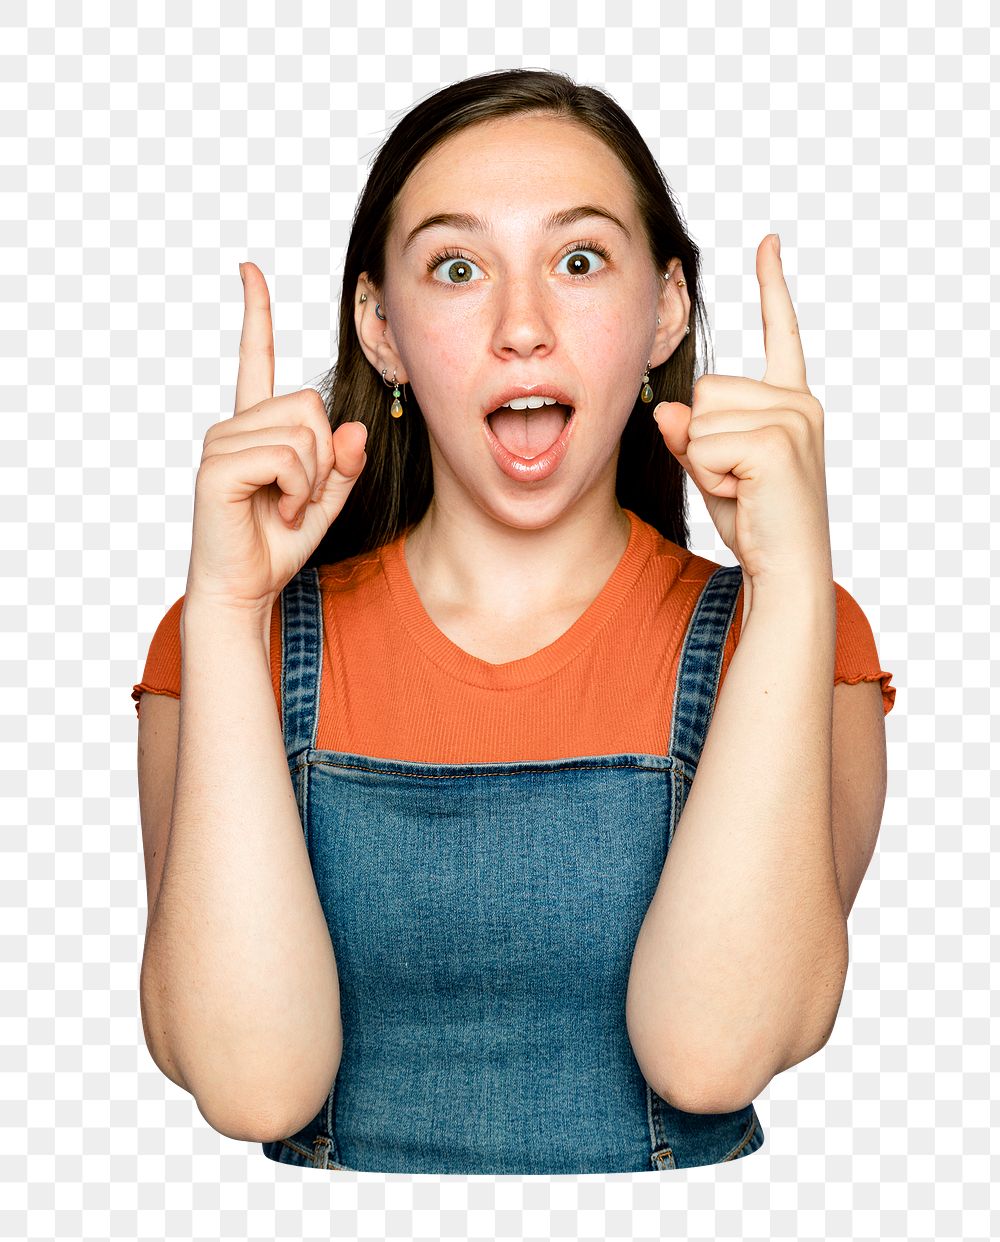 Surprised woman png sticker, transparent background